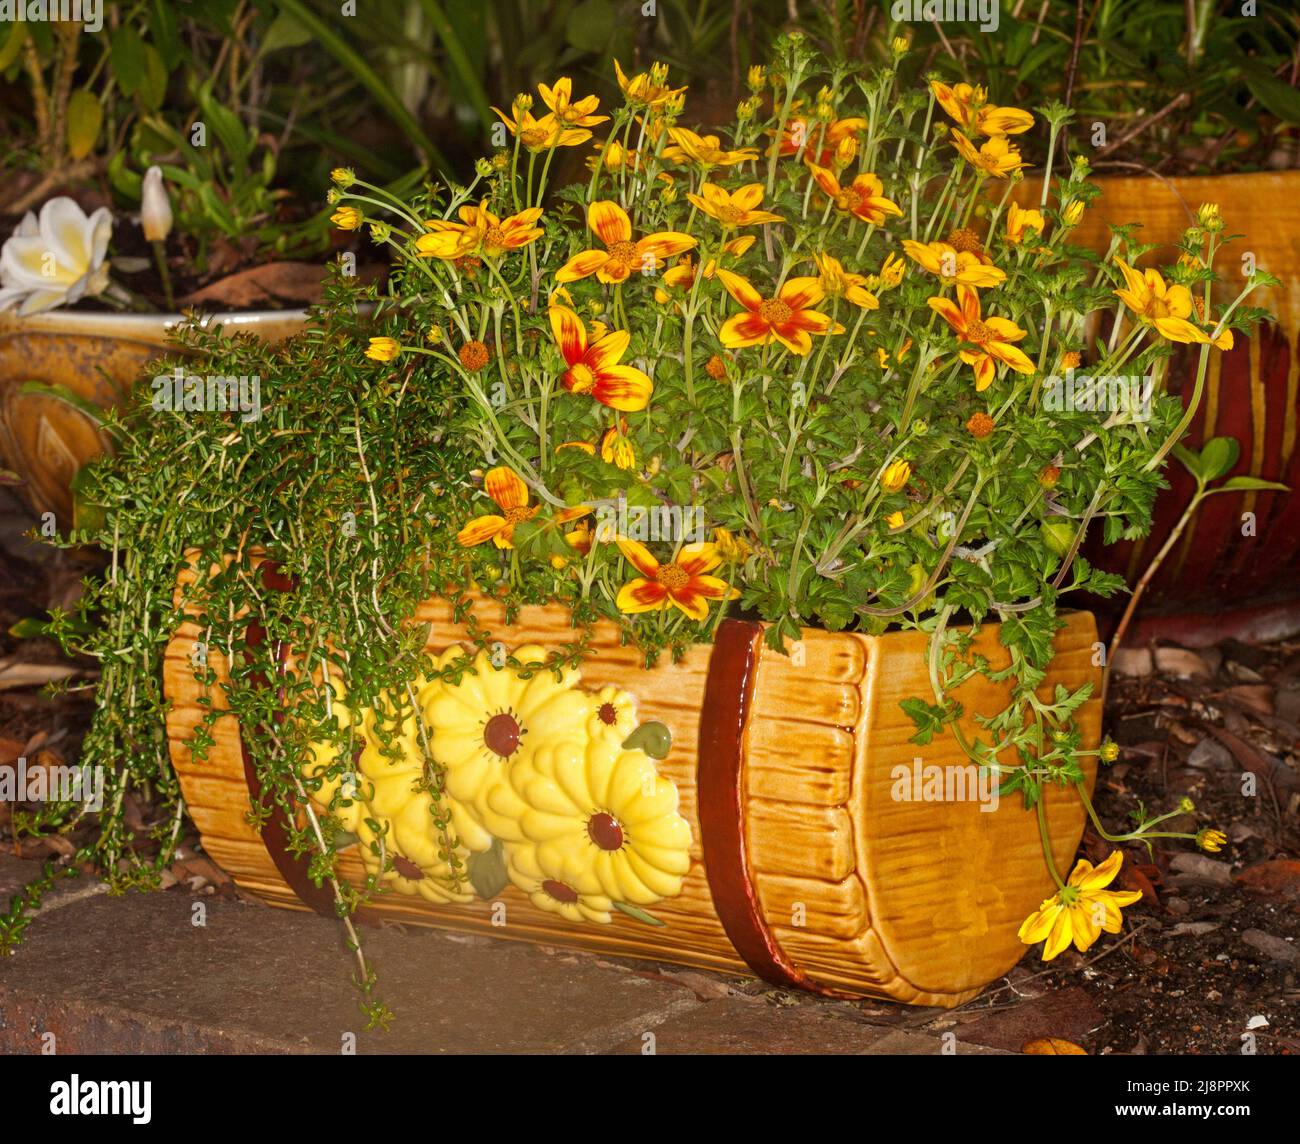 Unusual and decorative ceramic container / pot with yellow flowers and green foliage of Bidens, a perennial plant in a garden in Australia Stock Photo